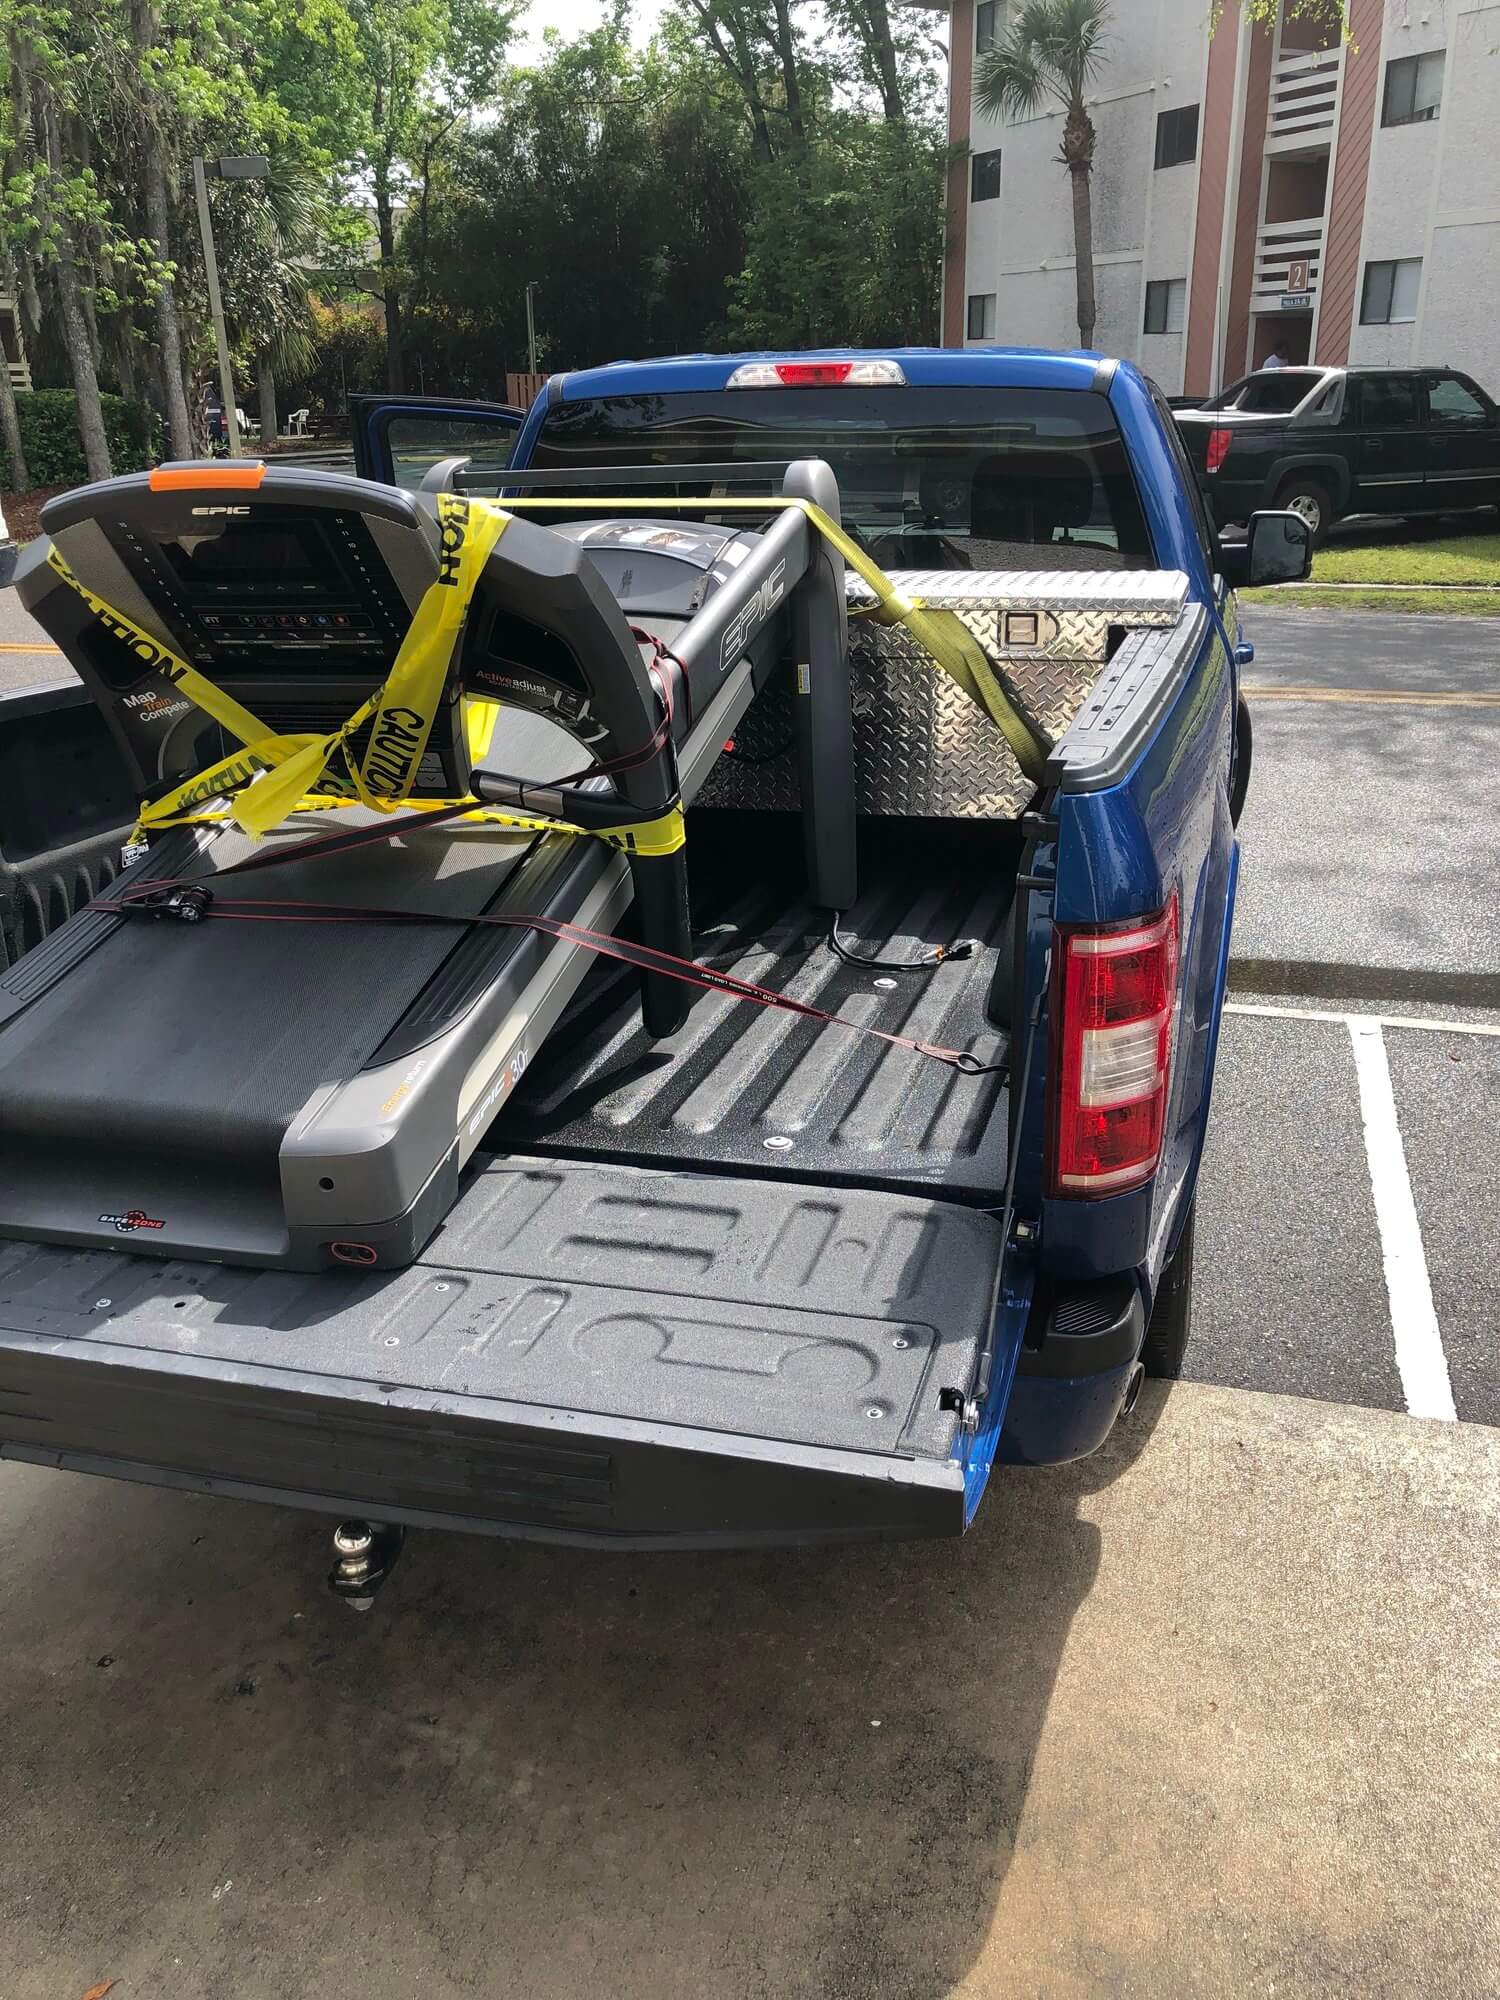 Exercise Equipment Junk Removal-Palm Beach Junk Removal and Trash Haulers